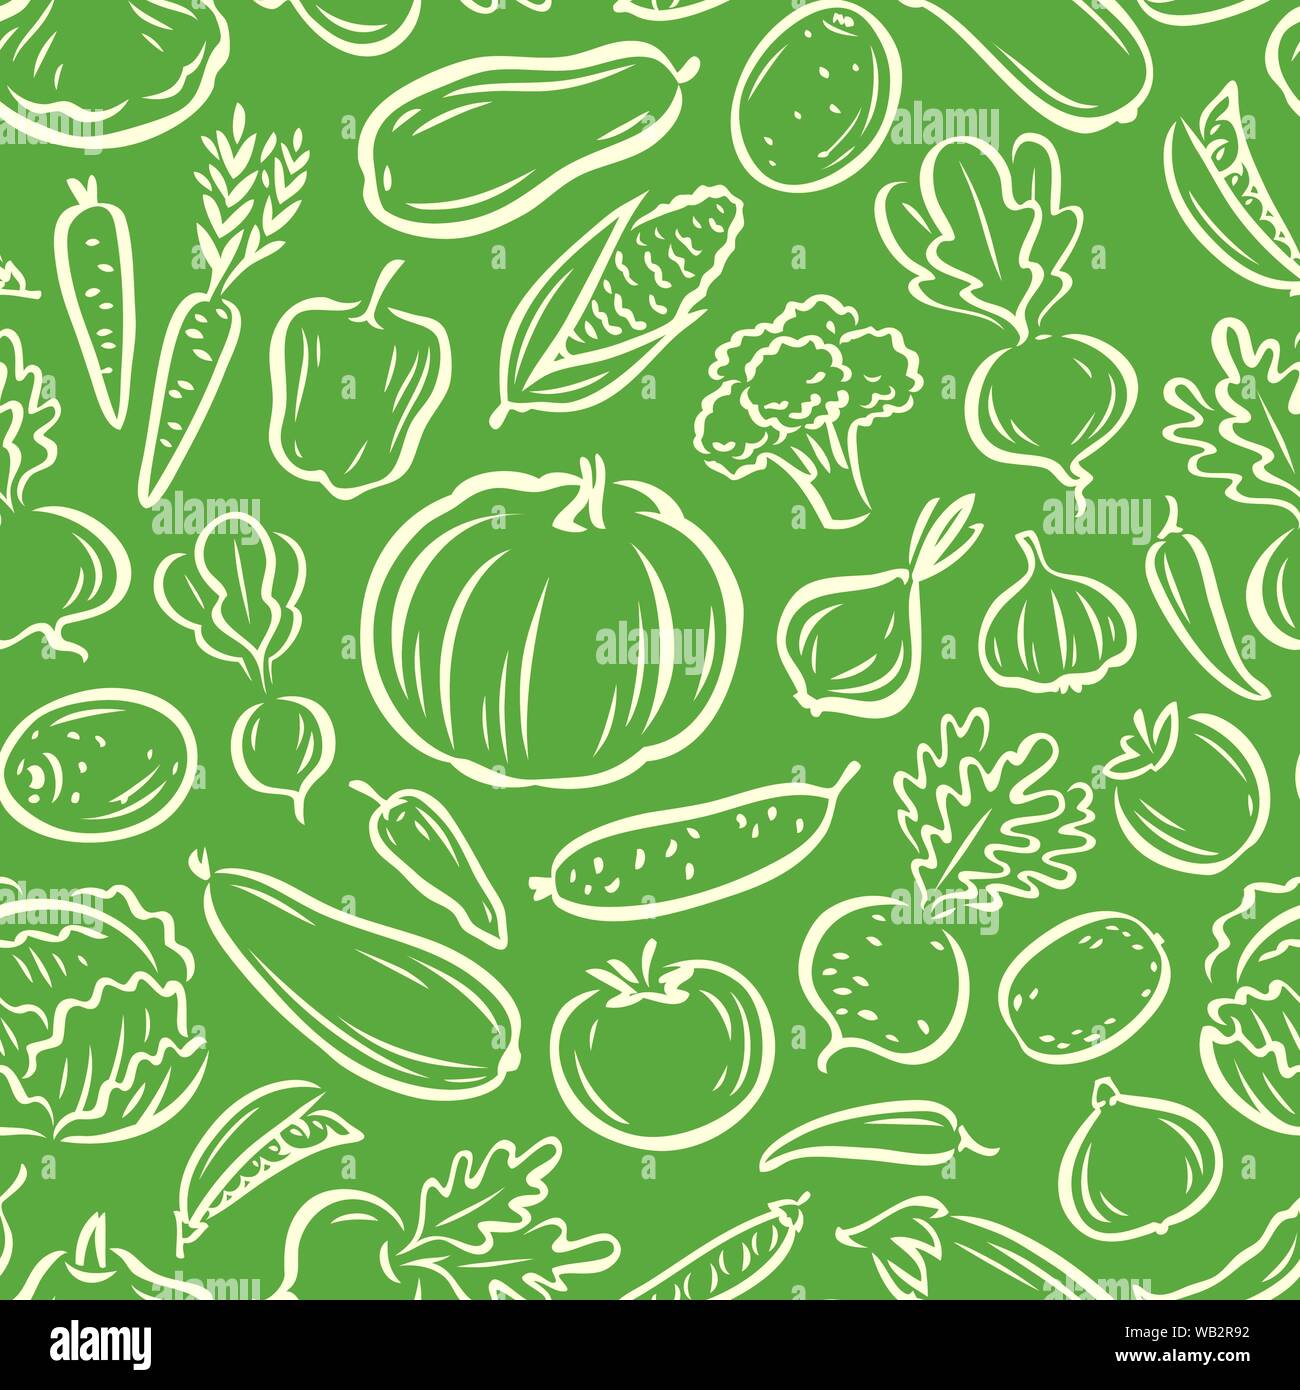 Vegetables seamless background. Agriculture, natural food, farming vector illustration Stock Vector